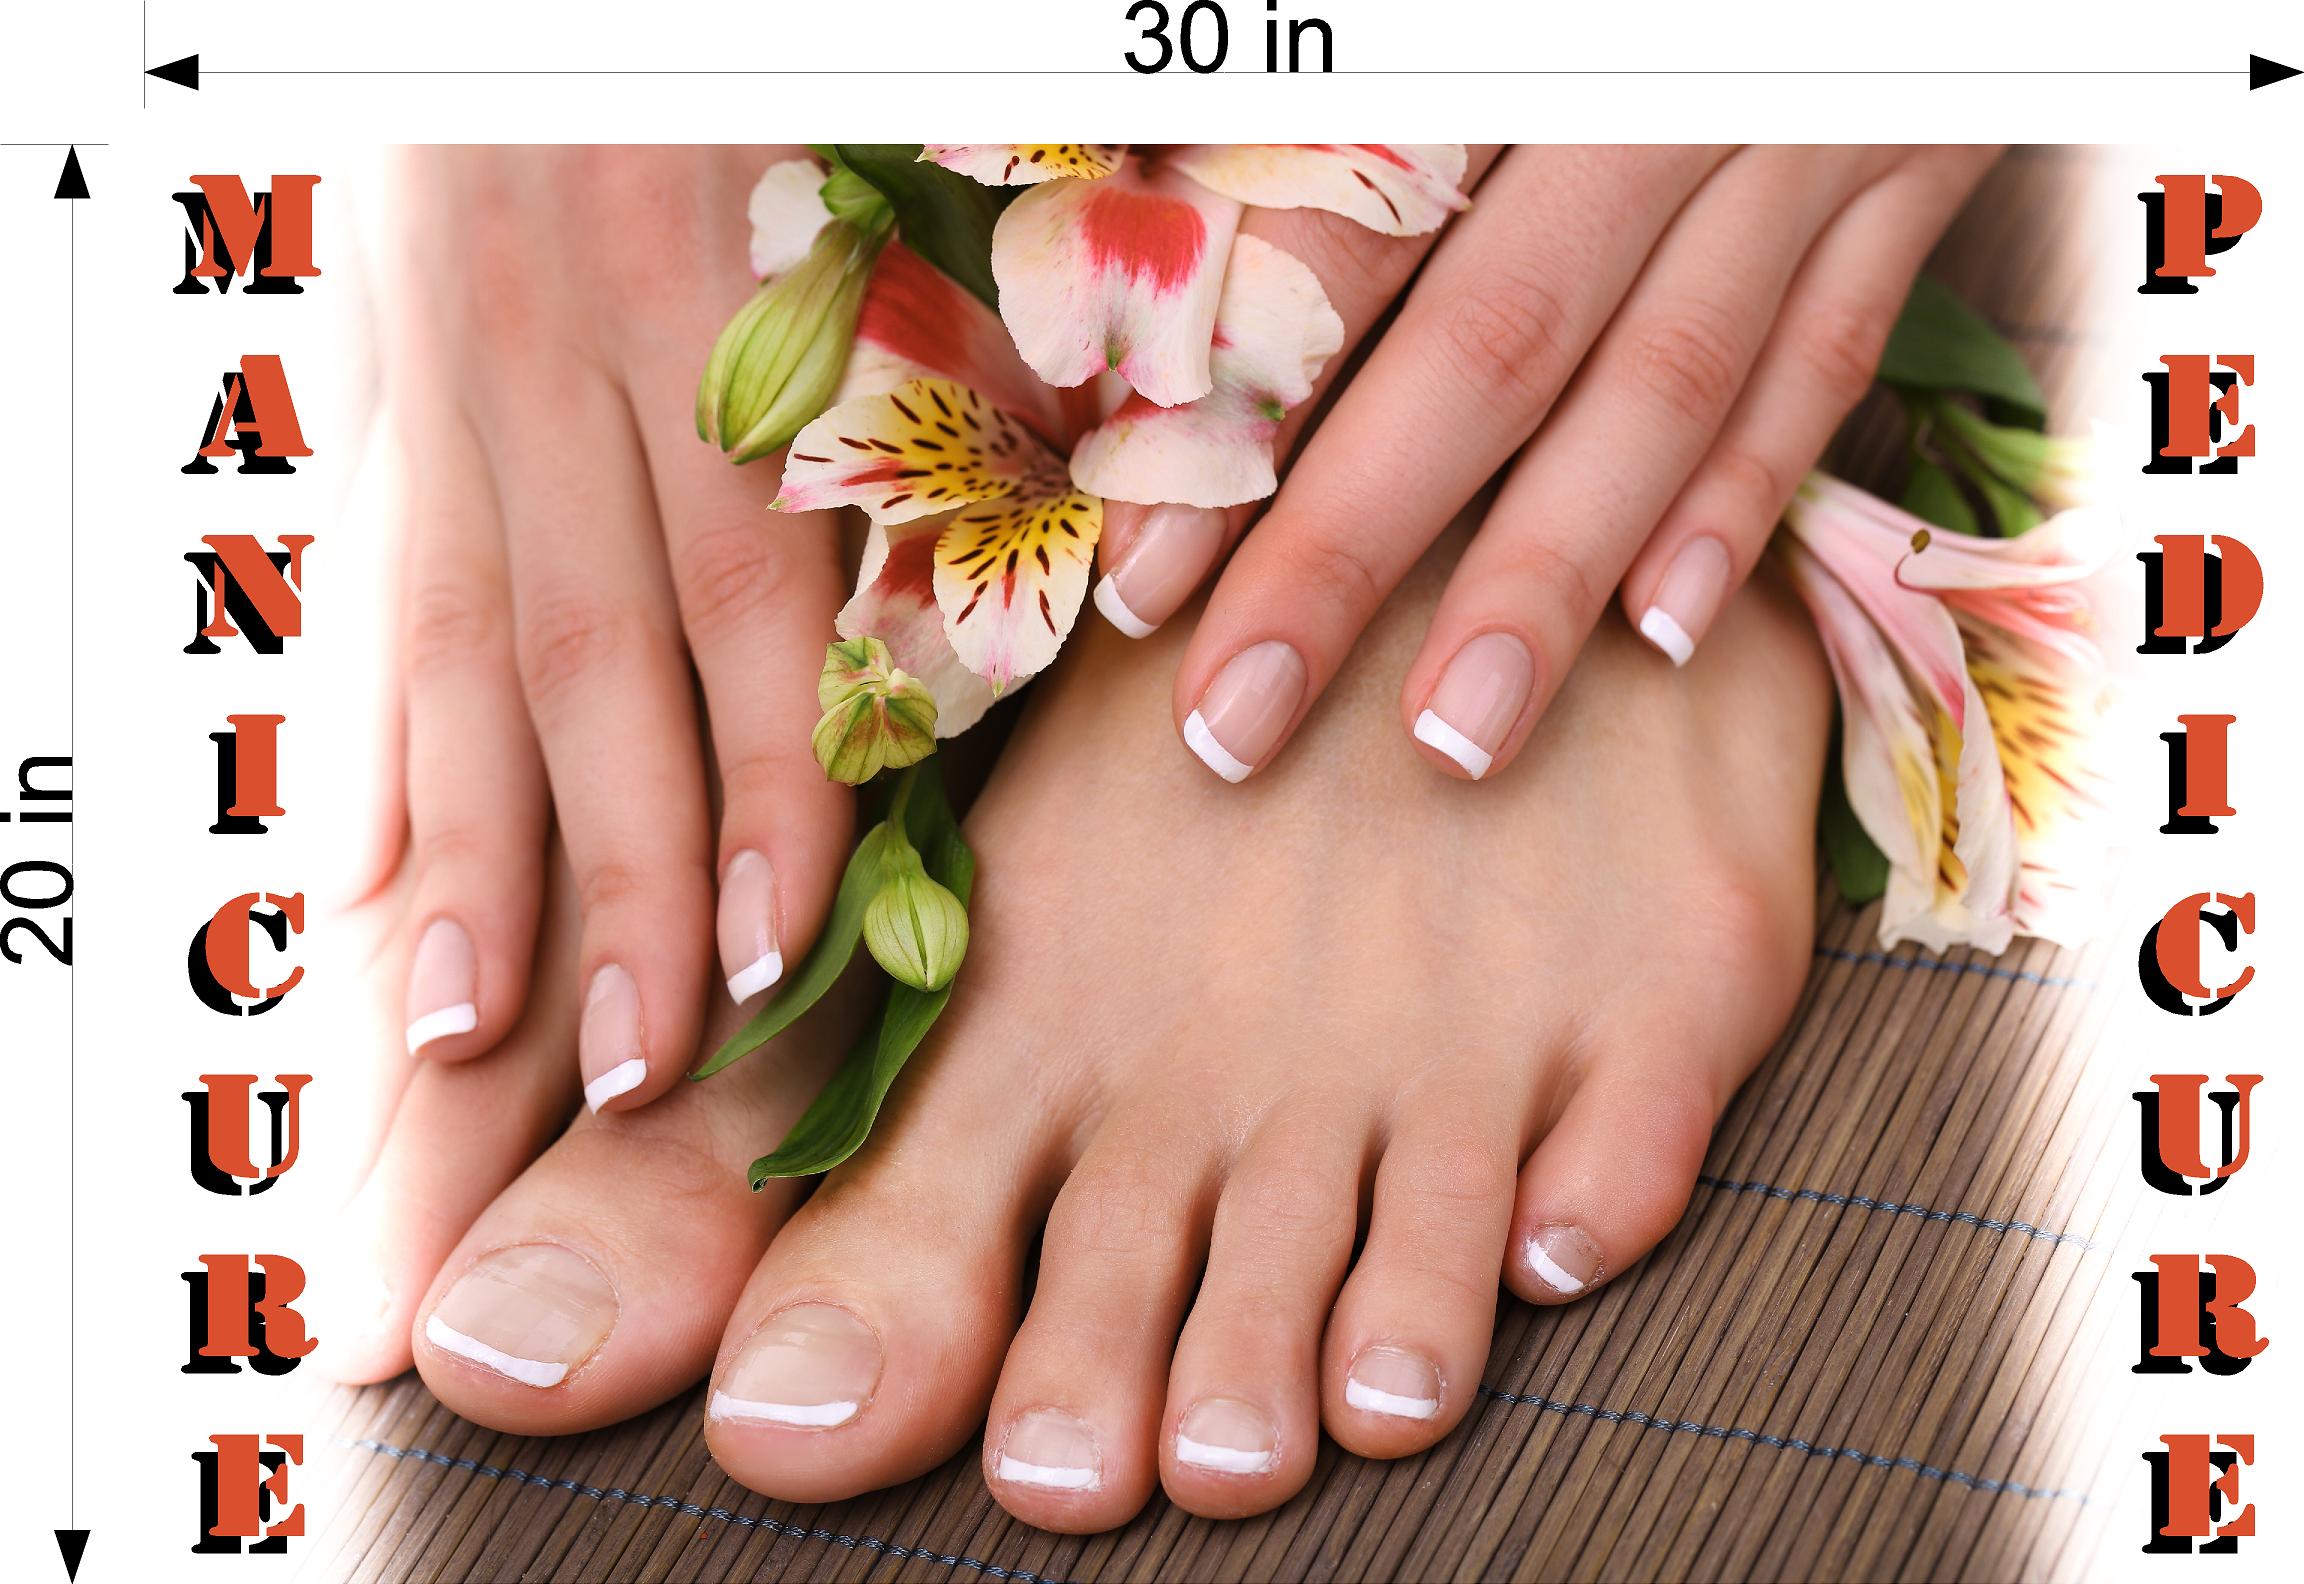 Pedicure & Manicure 13 Wallpaper Poster Decal with Adhesive Backing Wall Sticker Decor Indoors Interior Sign Horizontal